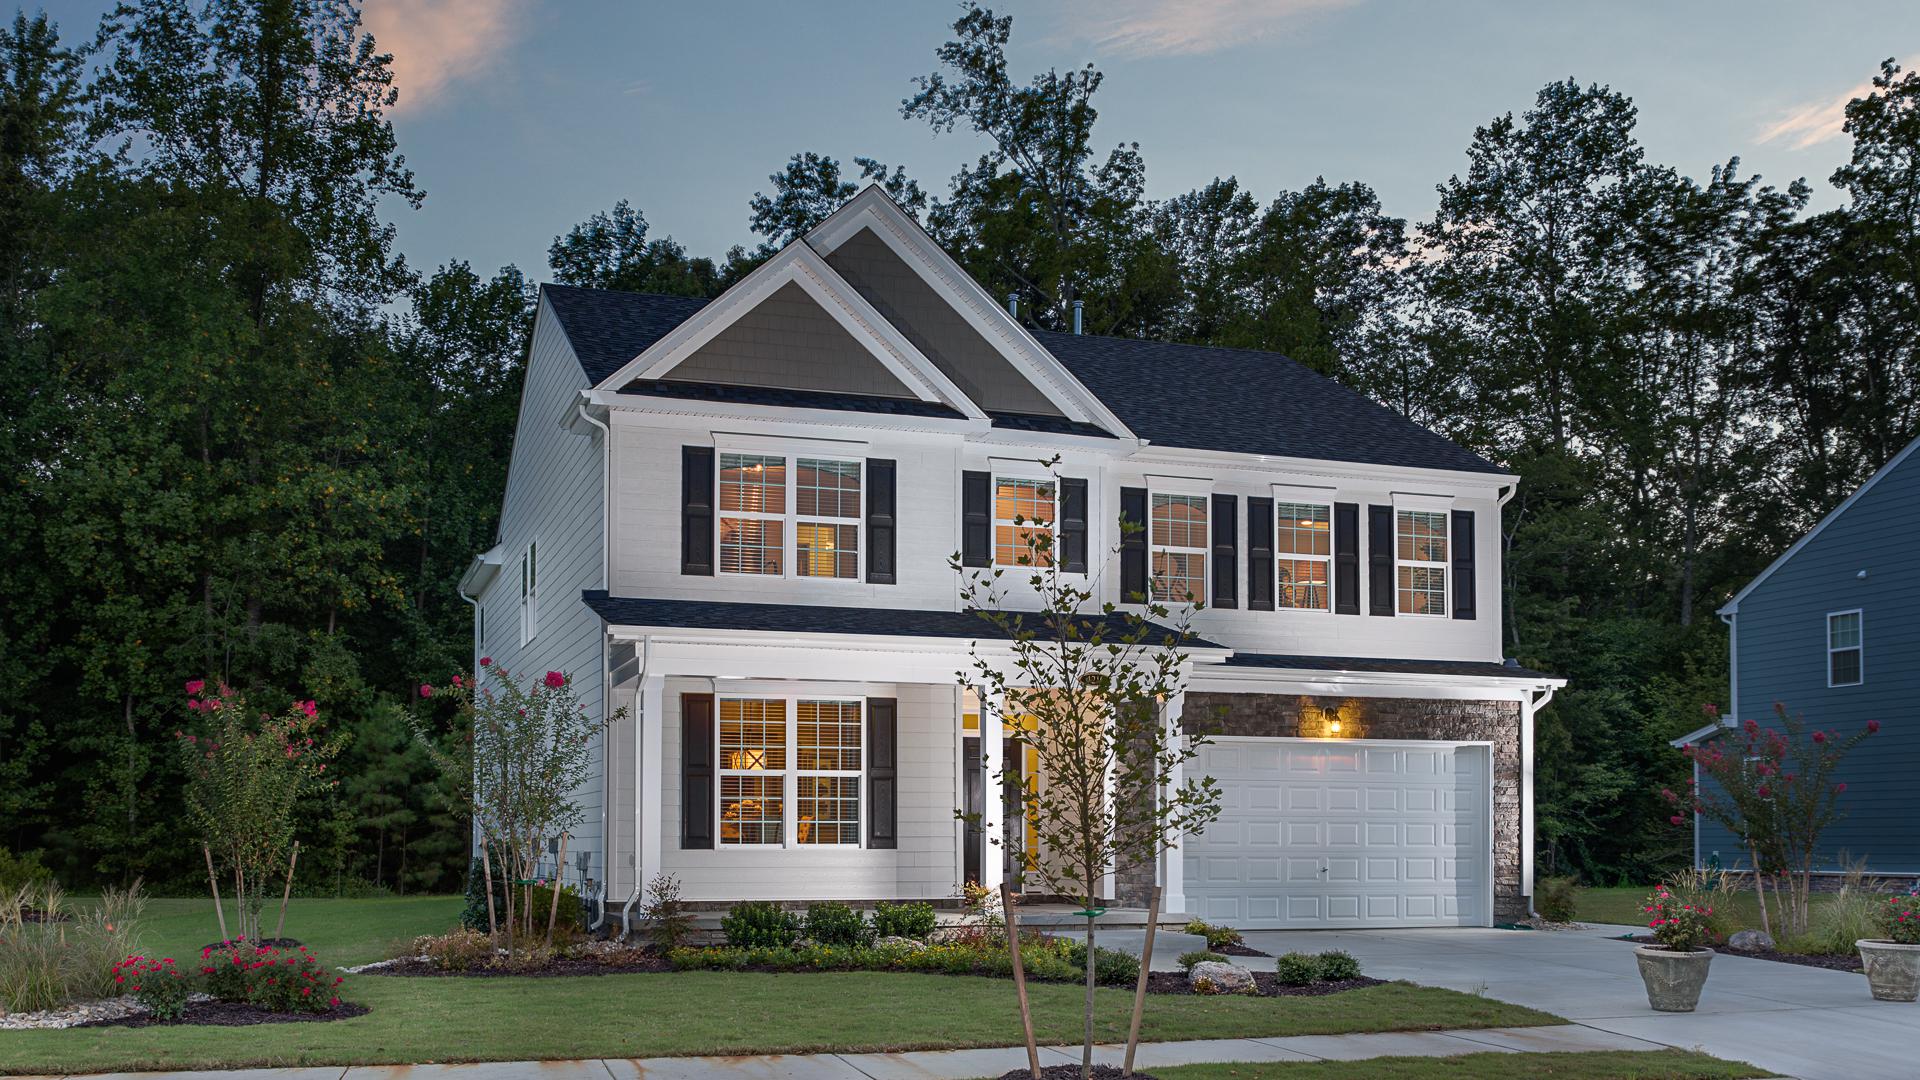 Chesapeake Homes Make Sure Your Home is Prepared for Warmer Weather